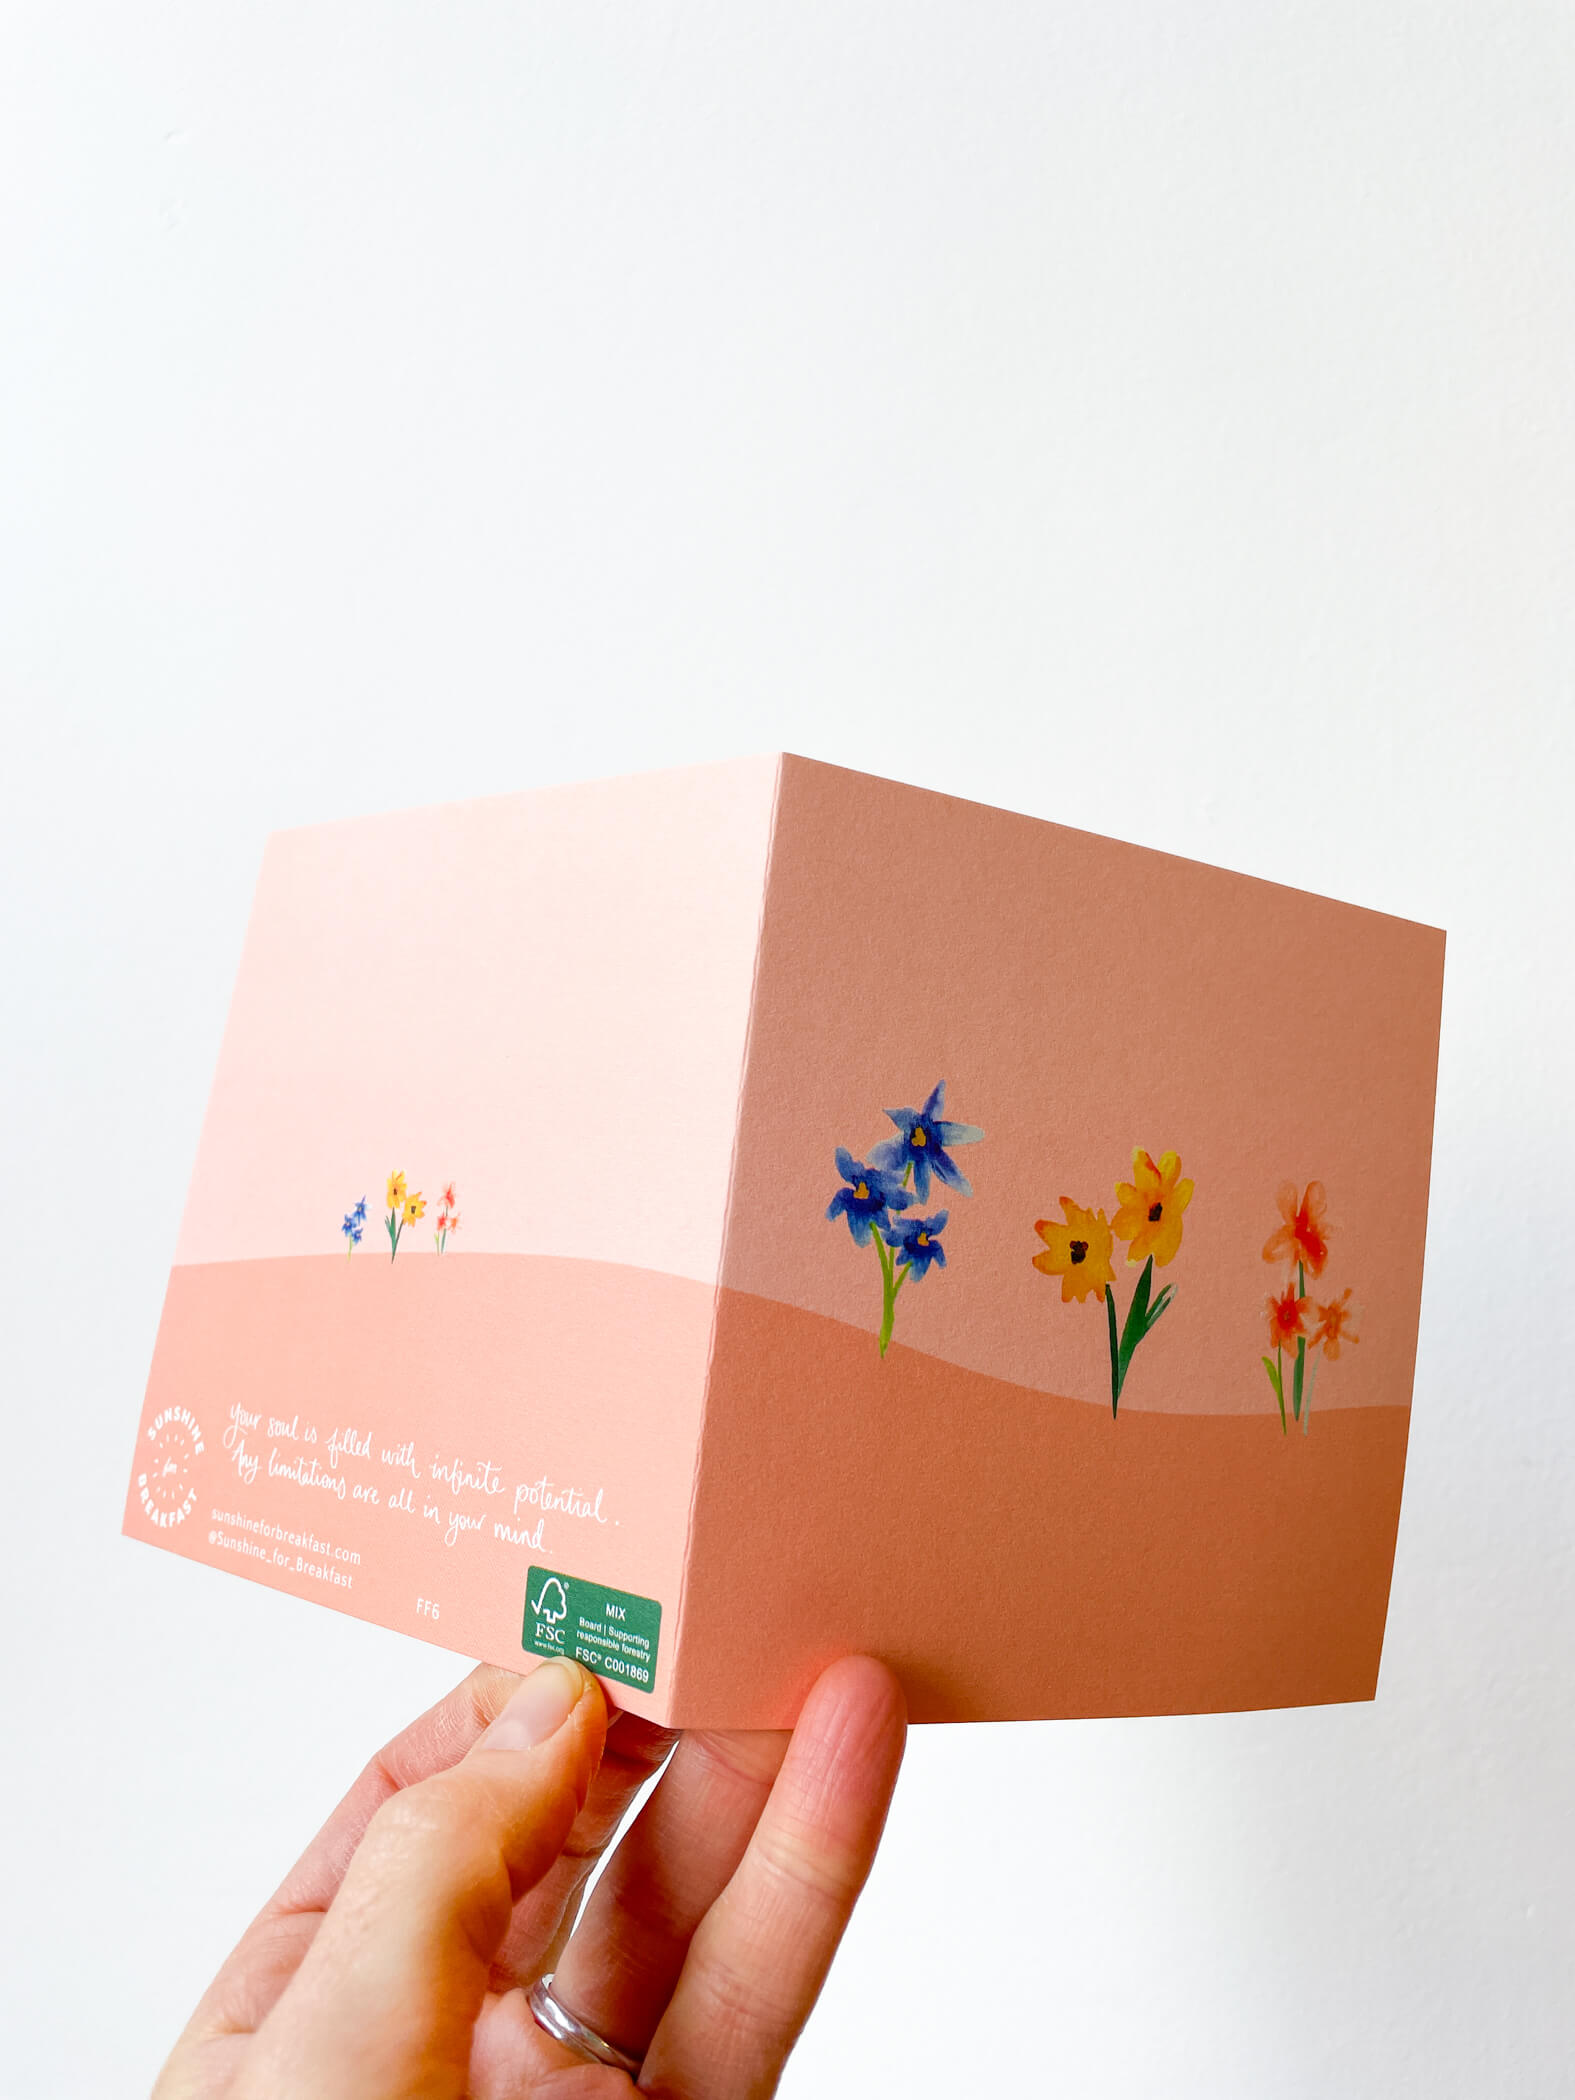 hand holding card with pink floral pattern